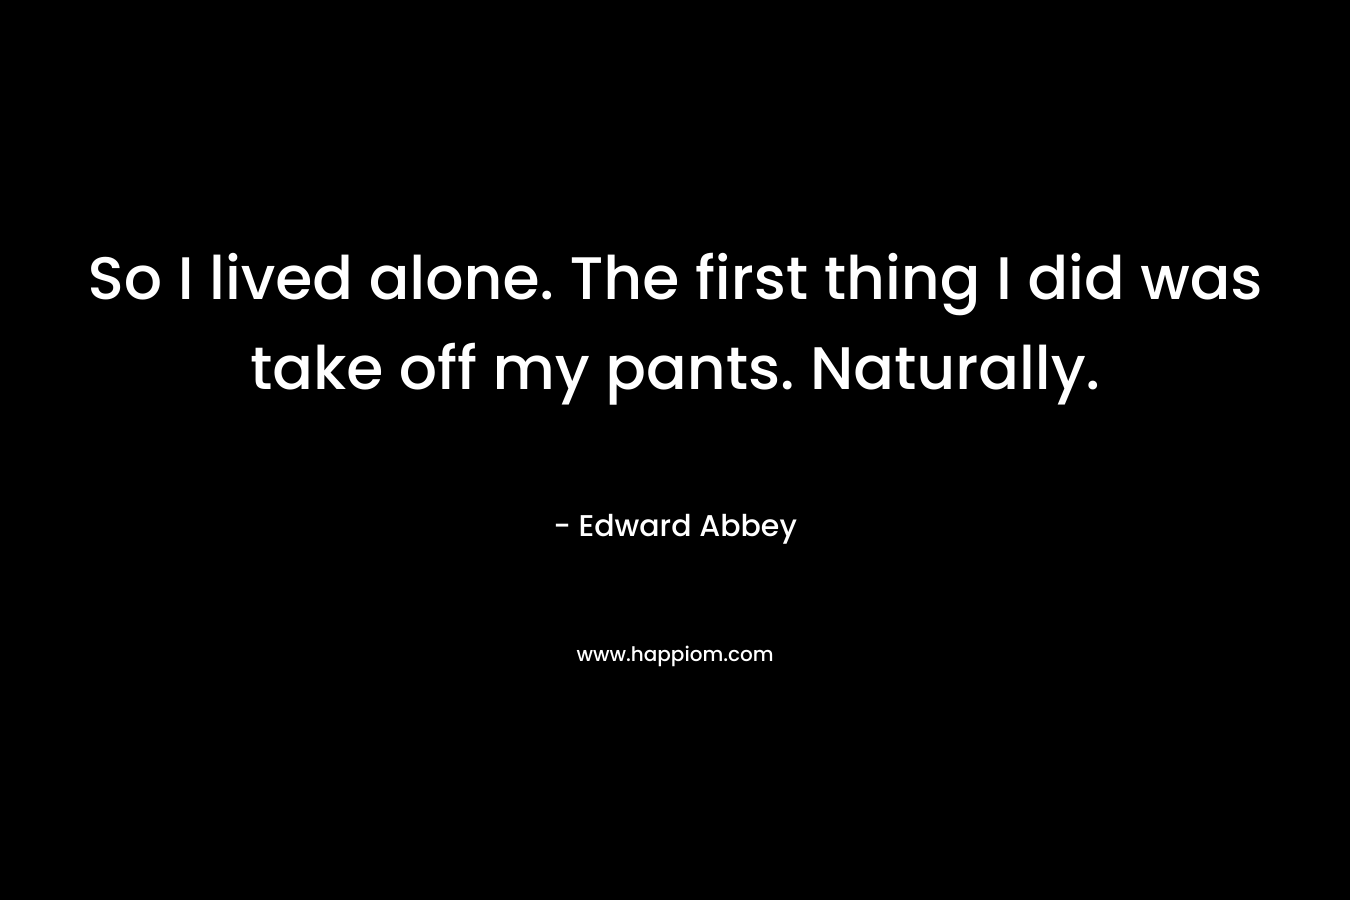 So I lived alone. The first thing I did was take off my pants. Naturally. – Edward Abbey